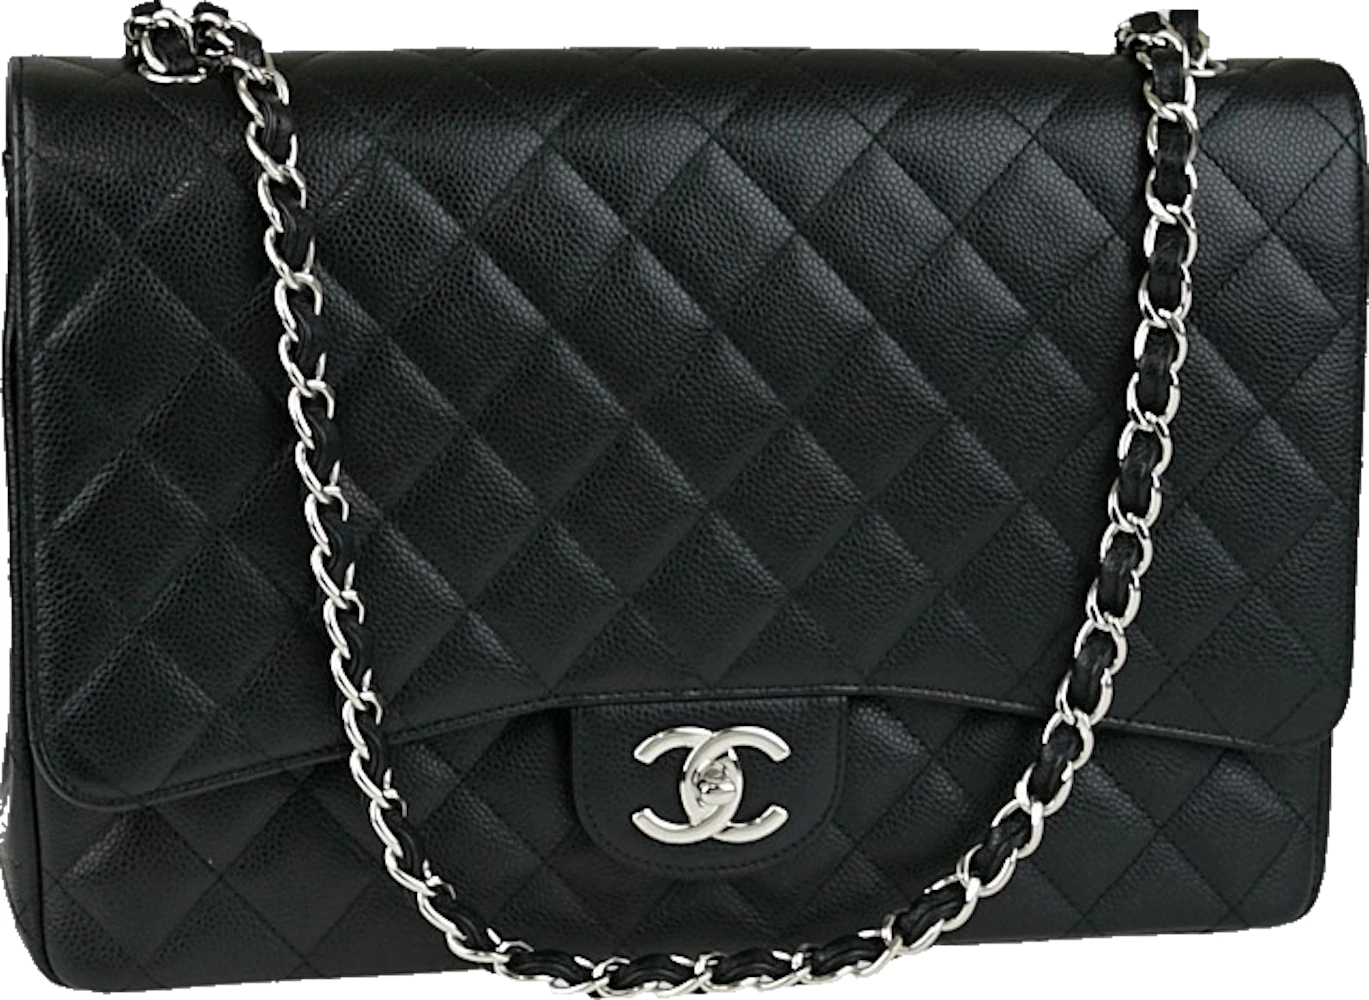 CHANEL White Jumbo Single Flap Classic Caviar Quilted Leather SHW